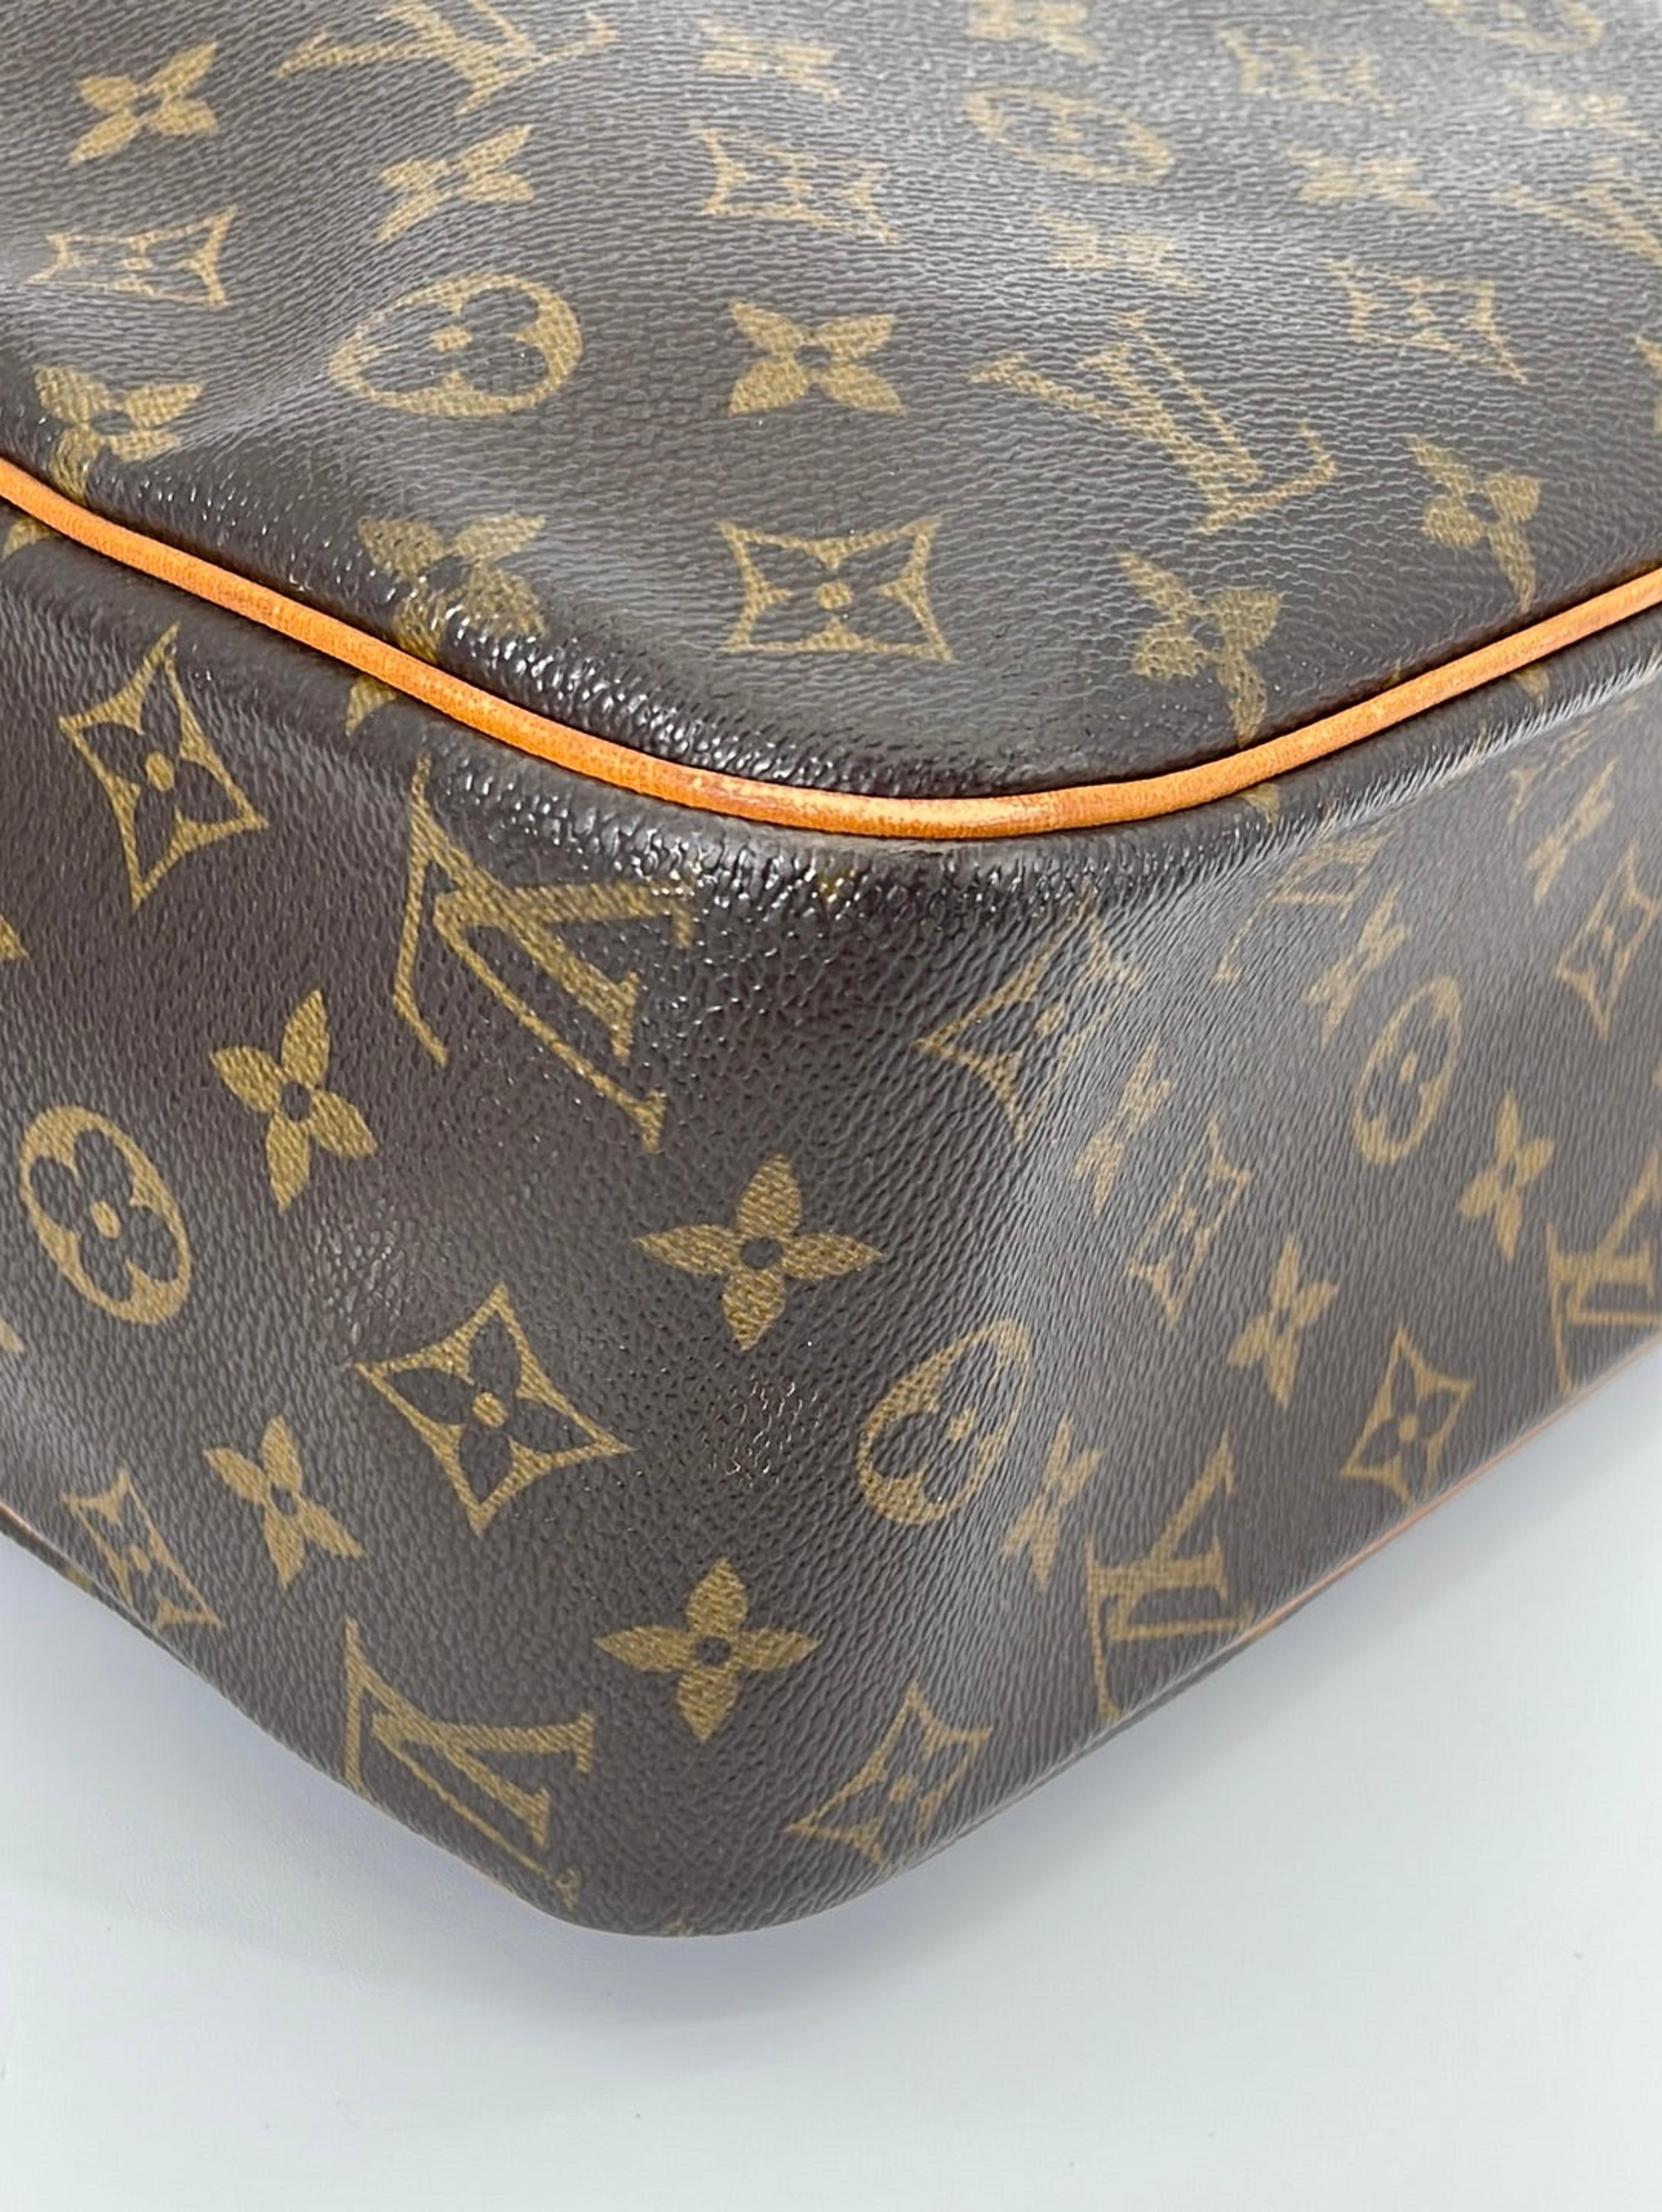 Louis Vuitton - Authenticated Félicie Handbag - Cloth Brown for Women, Never Worn, with Tag